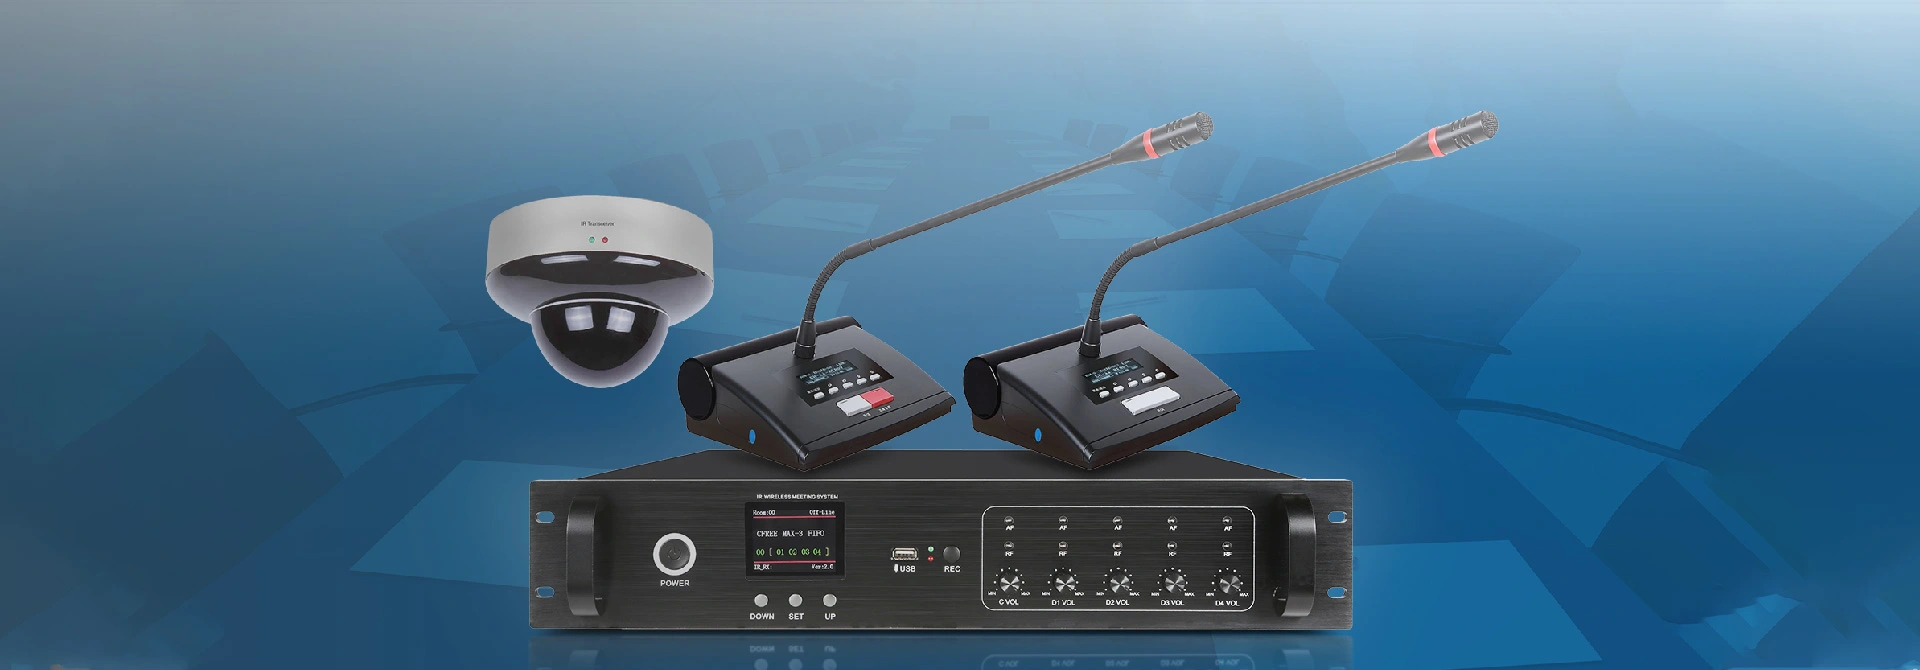 Infrared Wireless Conference System Solution para sa Conference Room D6711